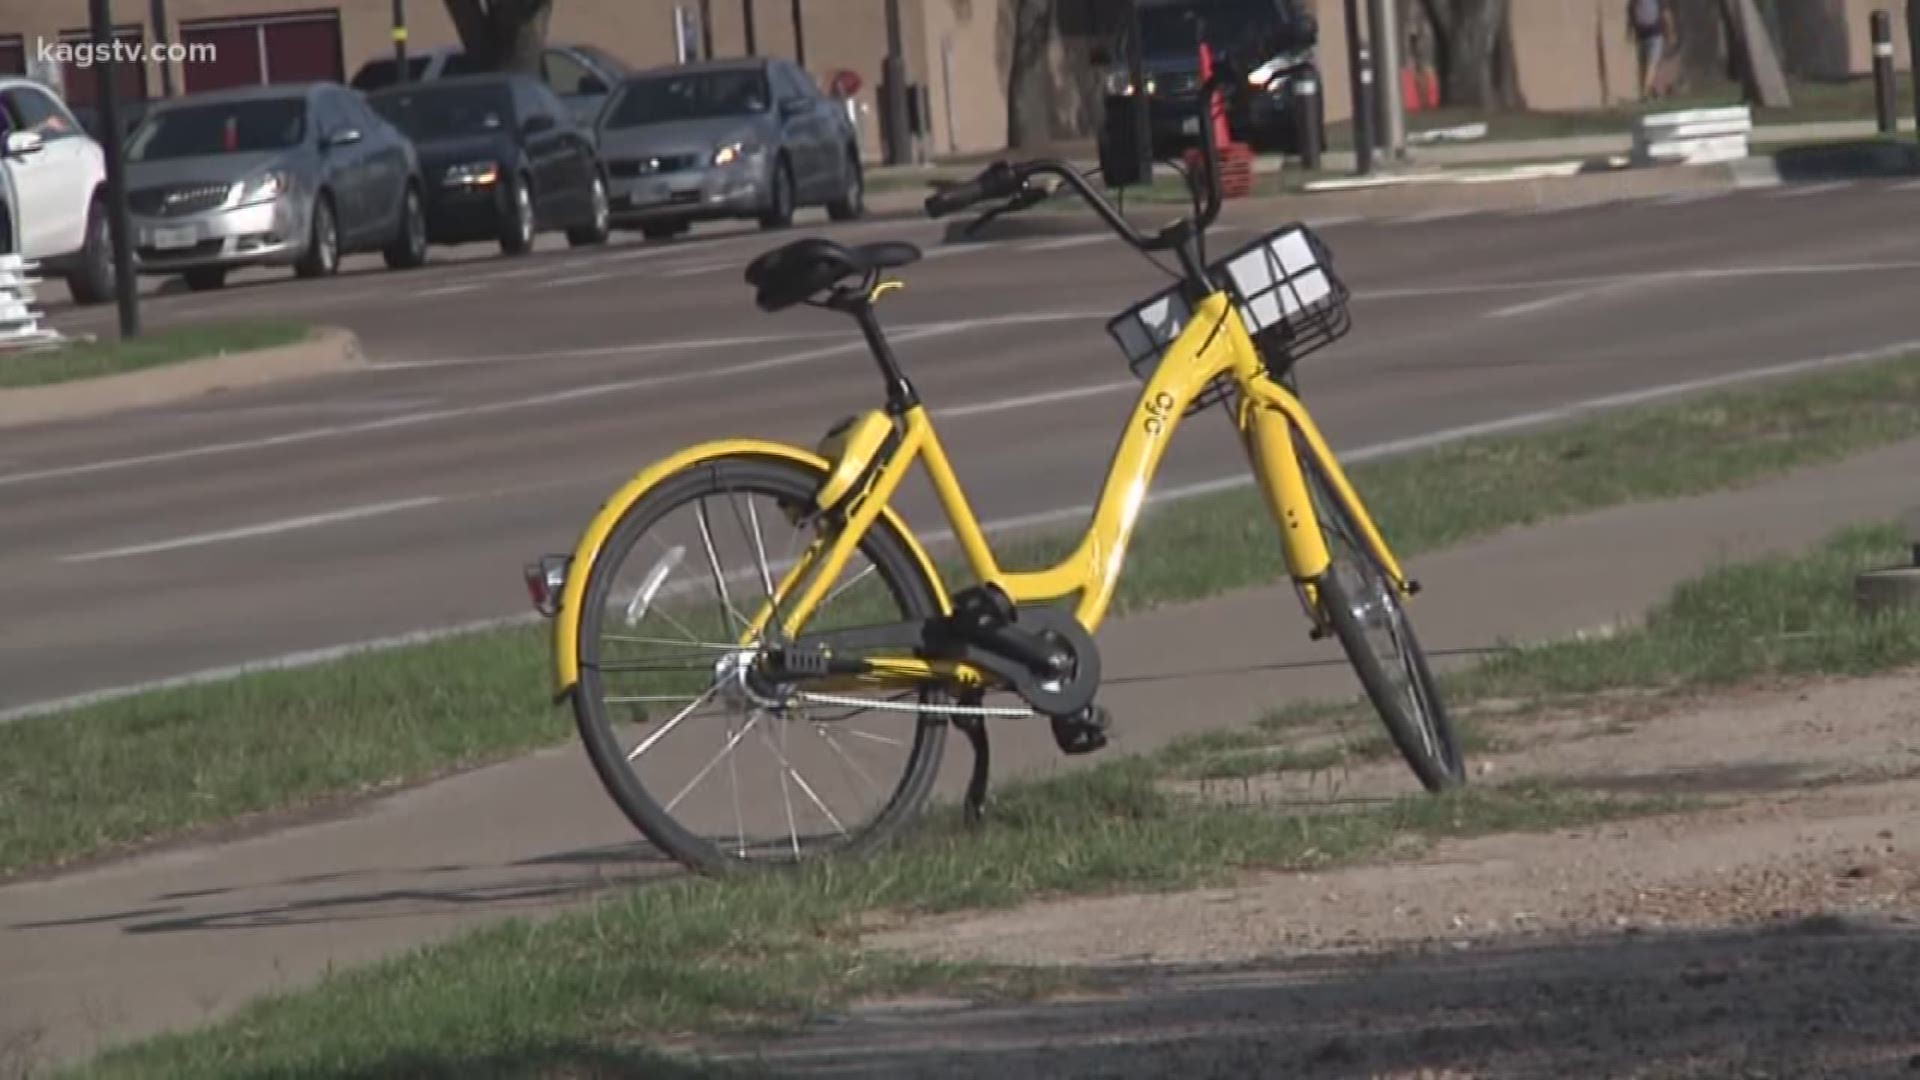 A&M Transportation Services are now rounding up the yellow bikes across town since the city revoked OFO's permit to operate Friday.